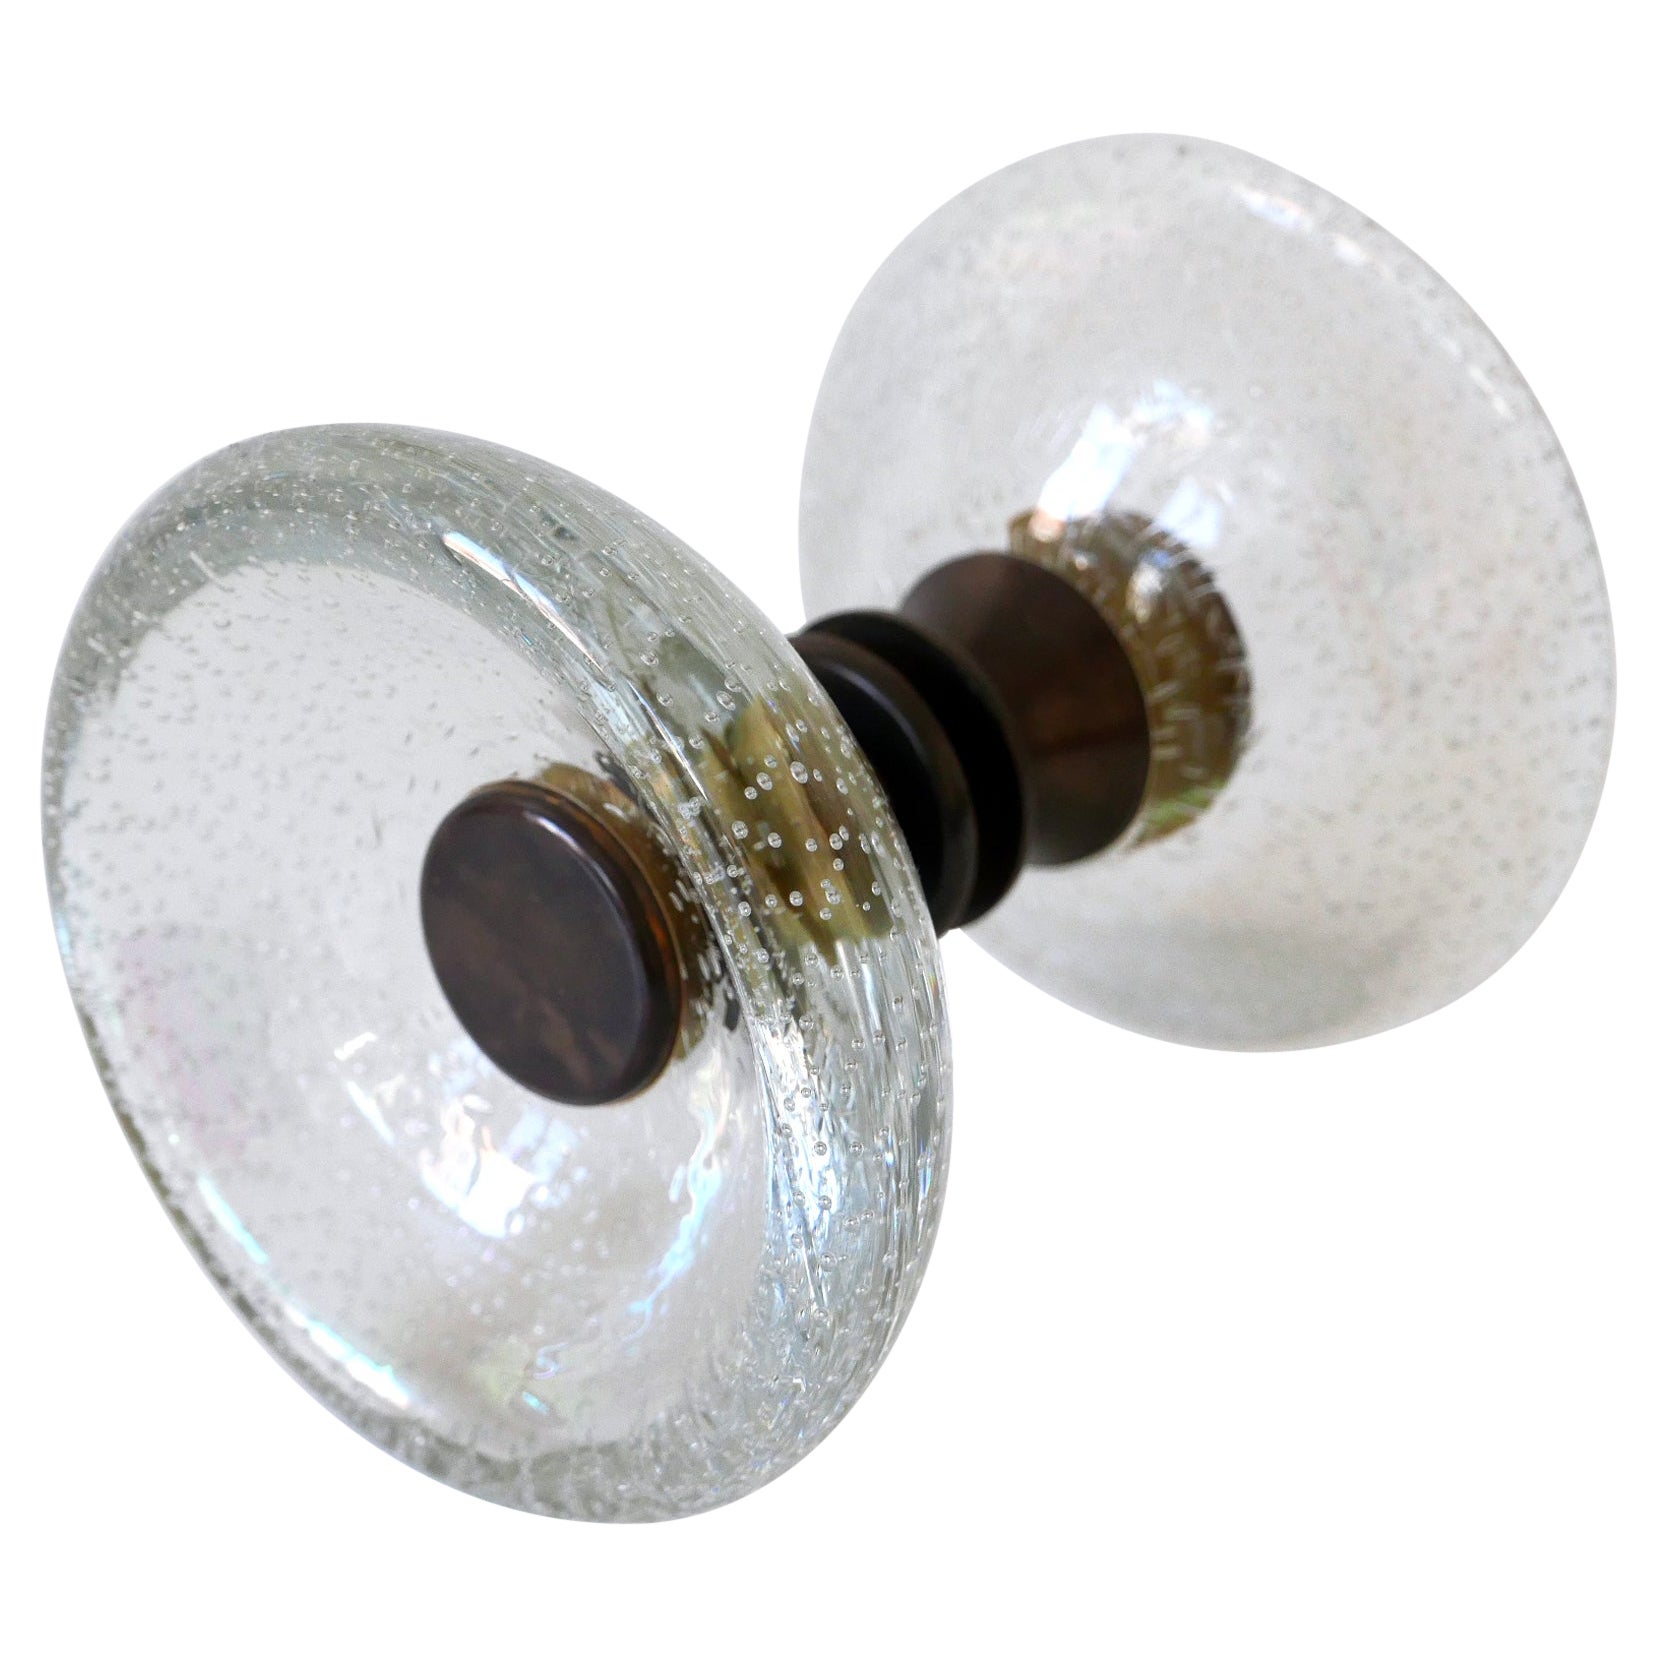 Exceptional Mid-Century Push and Pull Murano Glass Door Handle by Seguso 1960s